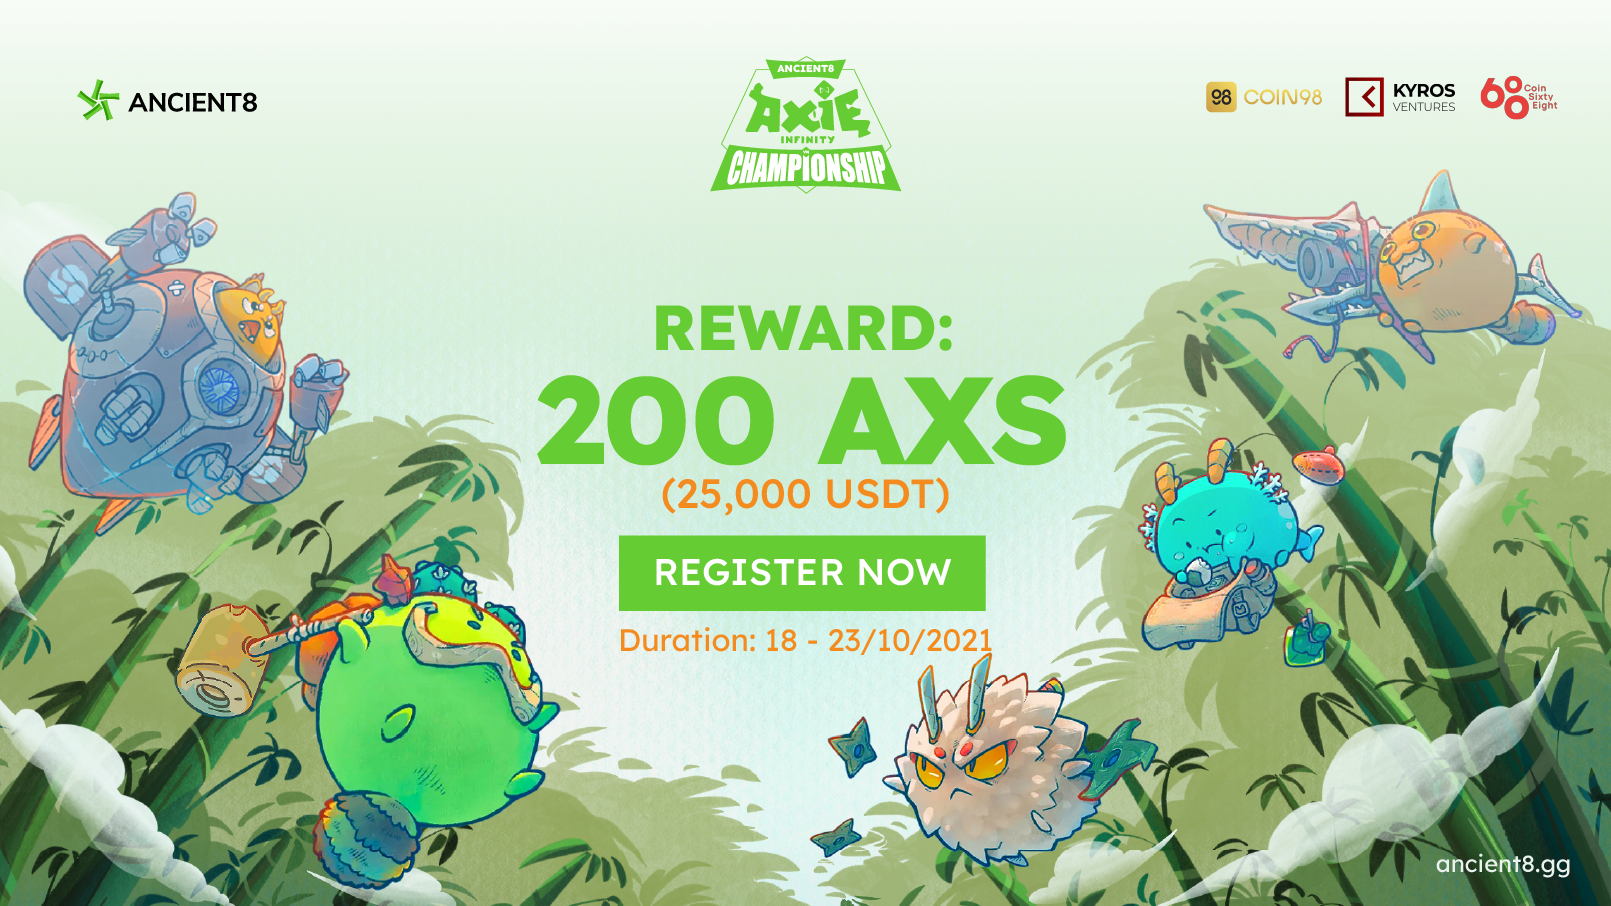 Ancient8 kicks off the first Axie Infinity VN Championship with 200 AXS prize pool